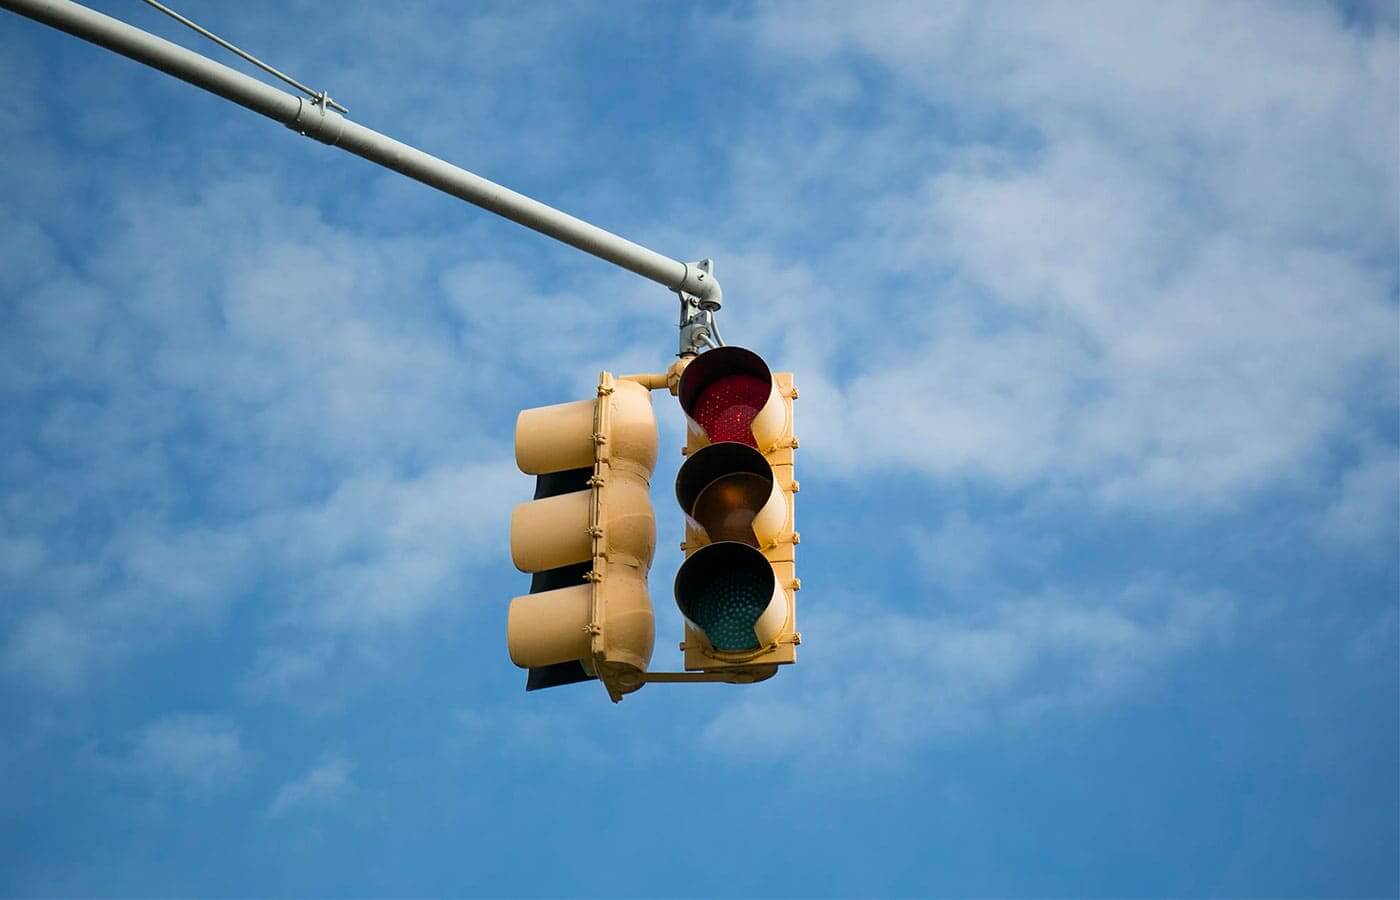 A traffic light showing red on a clear sunny day